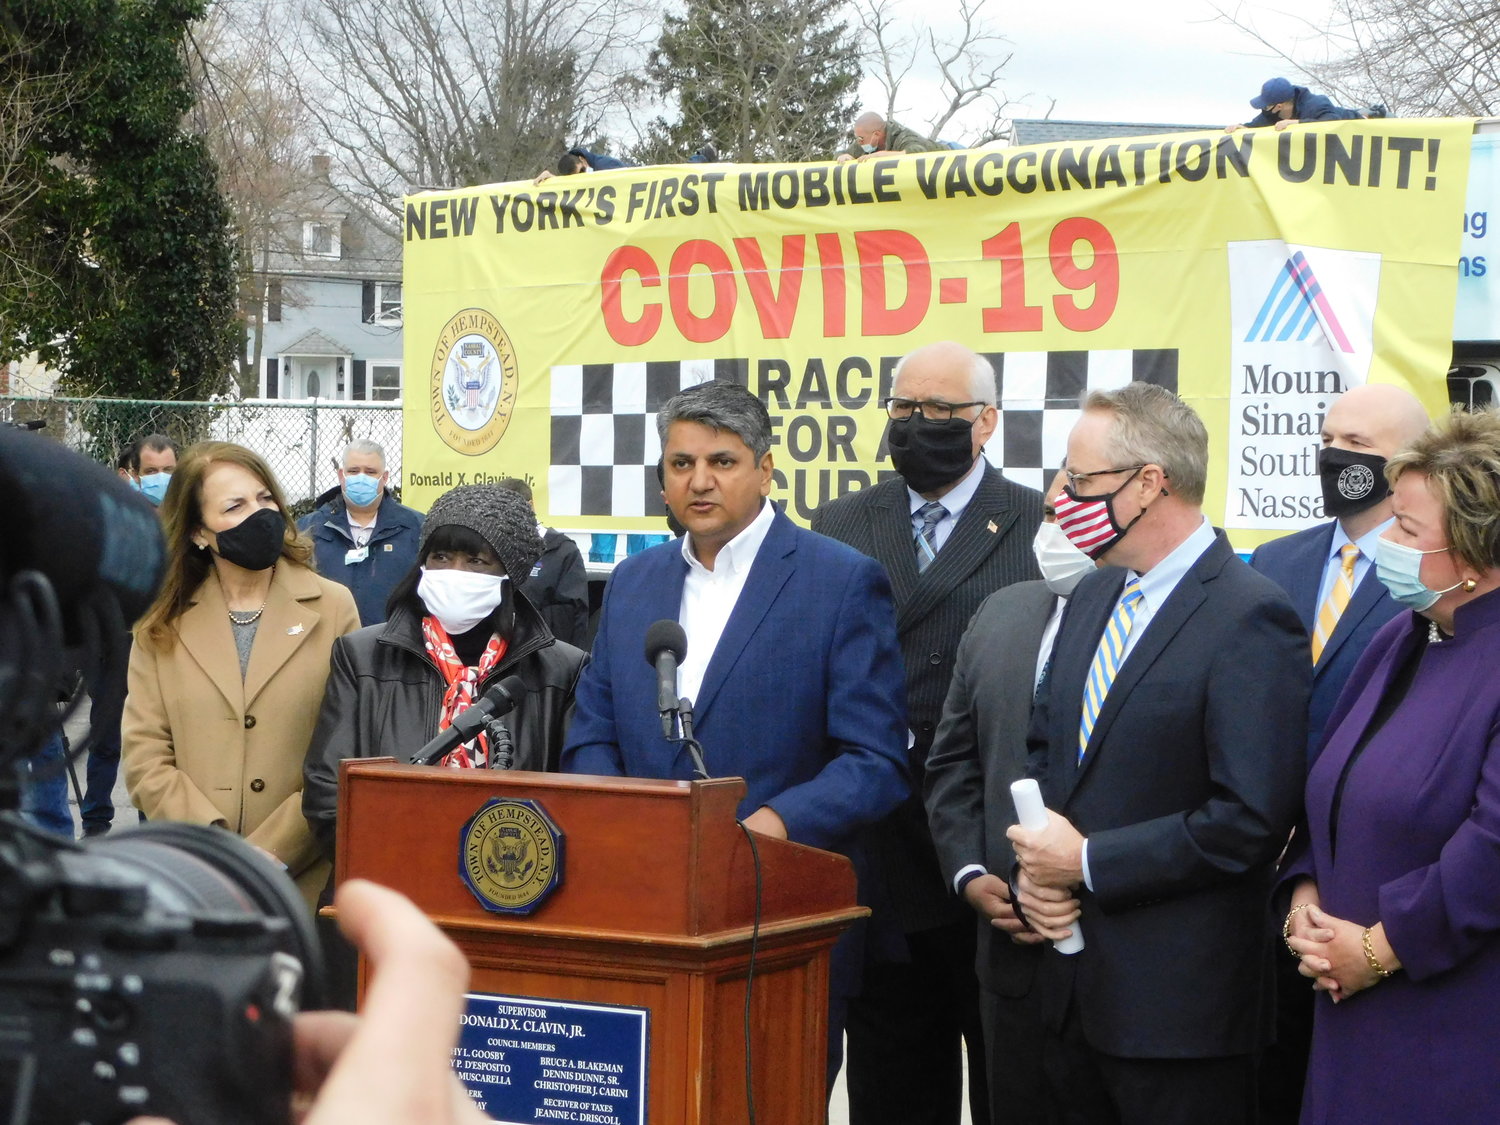 Dr. Adhi Sharma, chief medical officer at Mount Sinai South Nassau, stood with Town of Hempstead government officials at the unveiling of the Vaxmobile.